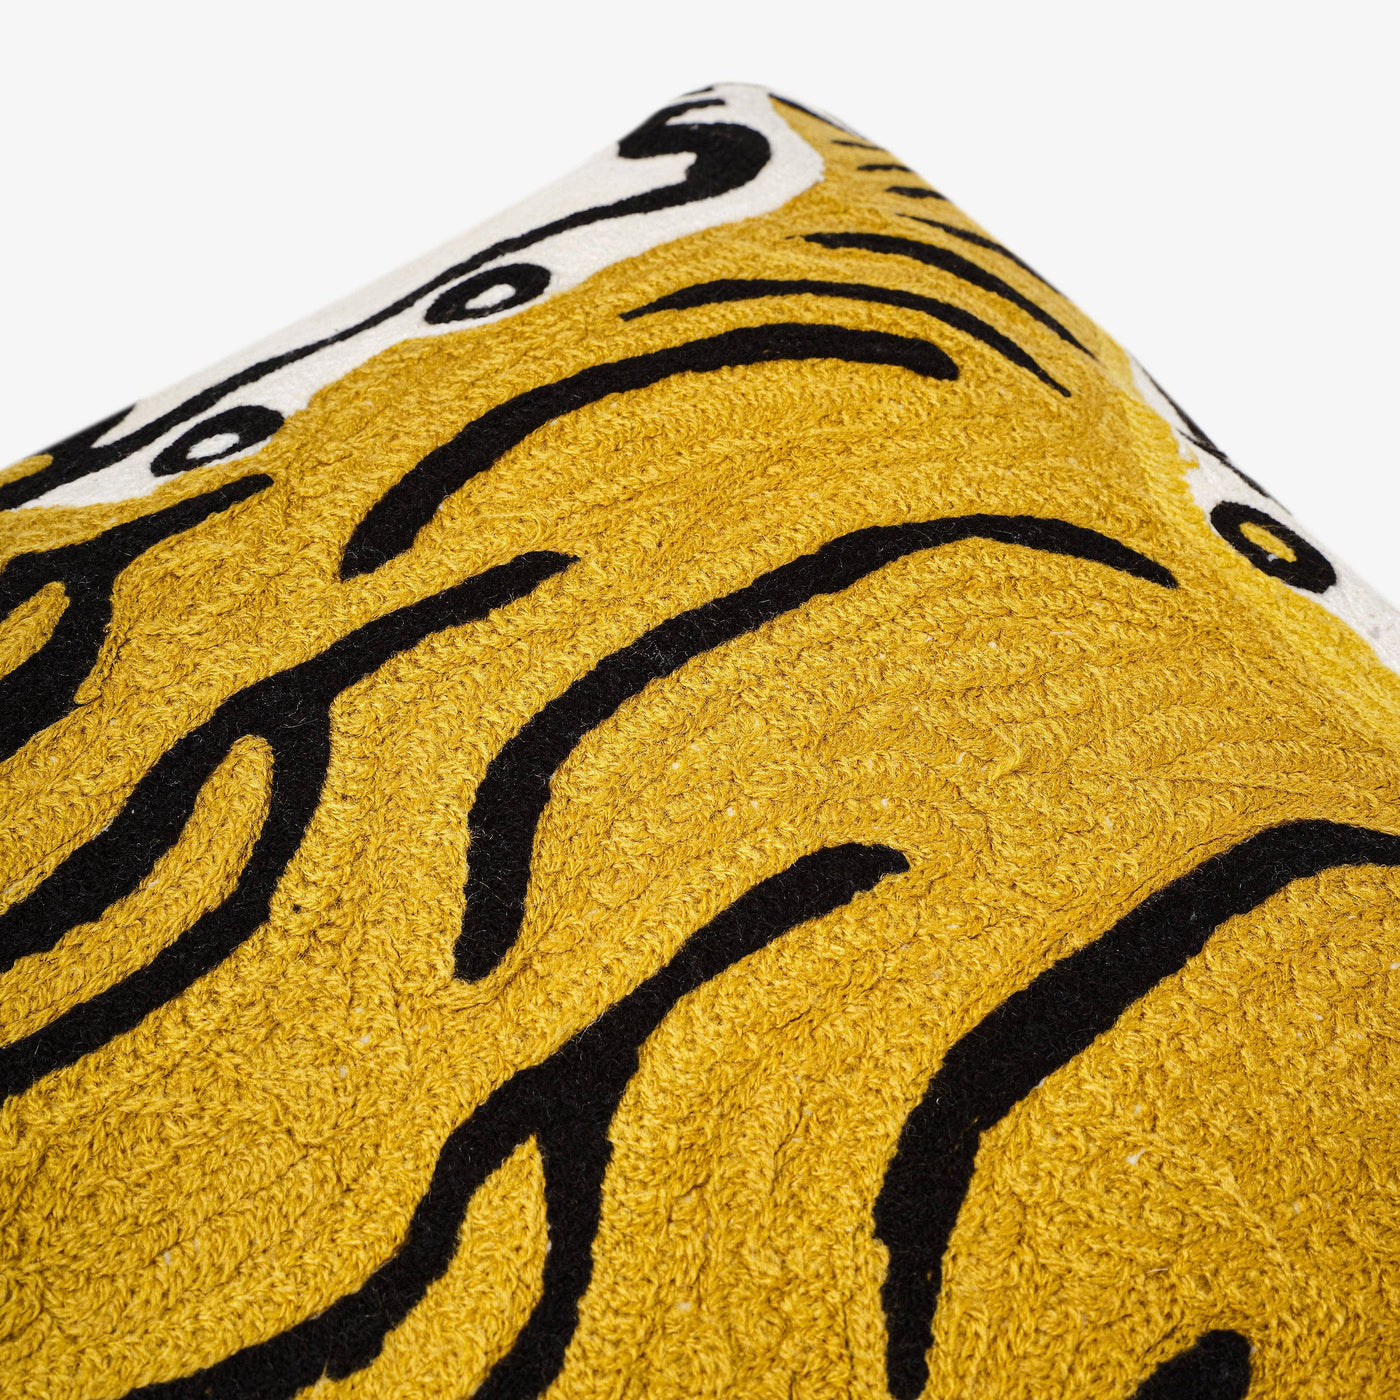 Shere Tiger Cushion Cover, White - Mustard, 60x60 cm 6